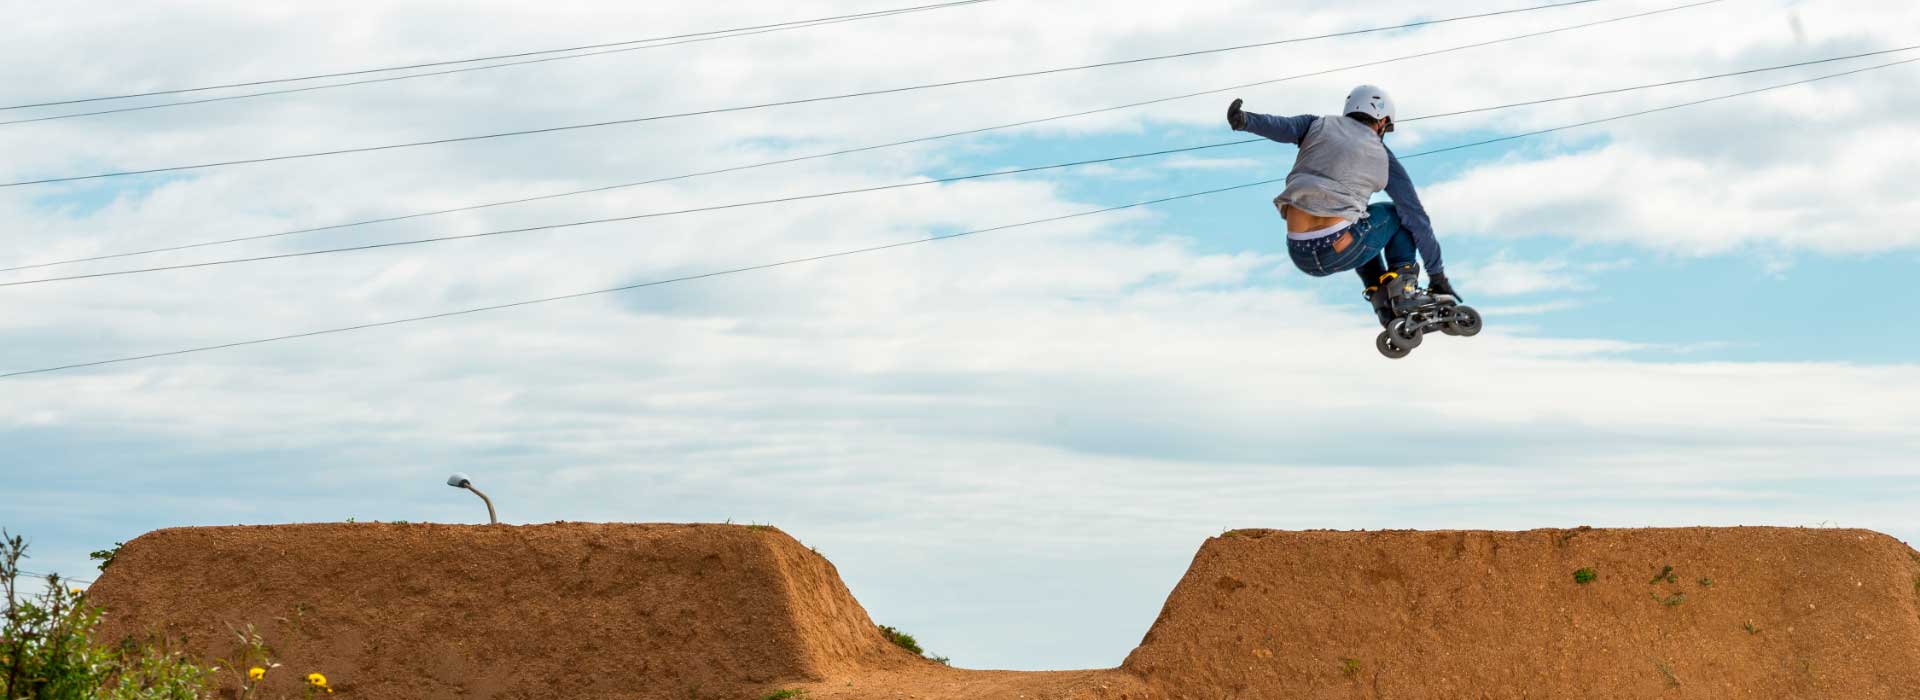 A person on Extreme SUV inline skates launches into the air on a dirt course